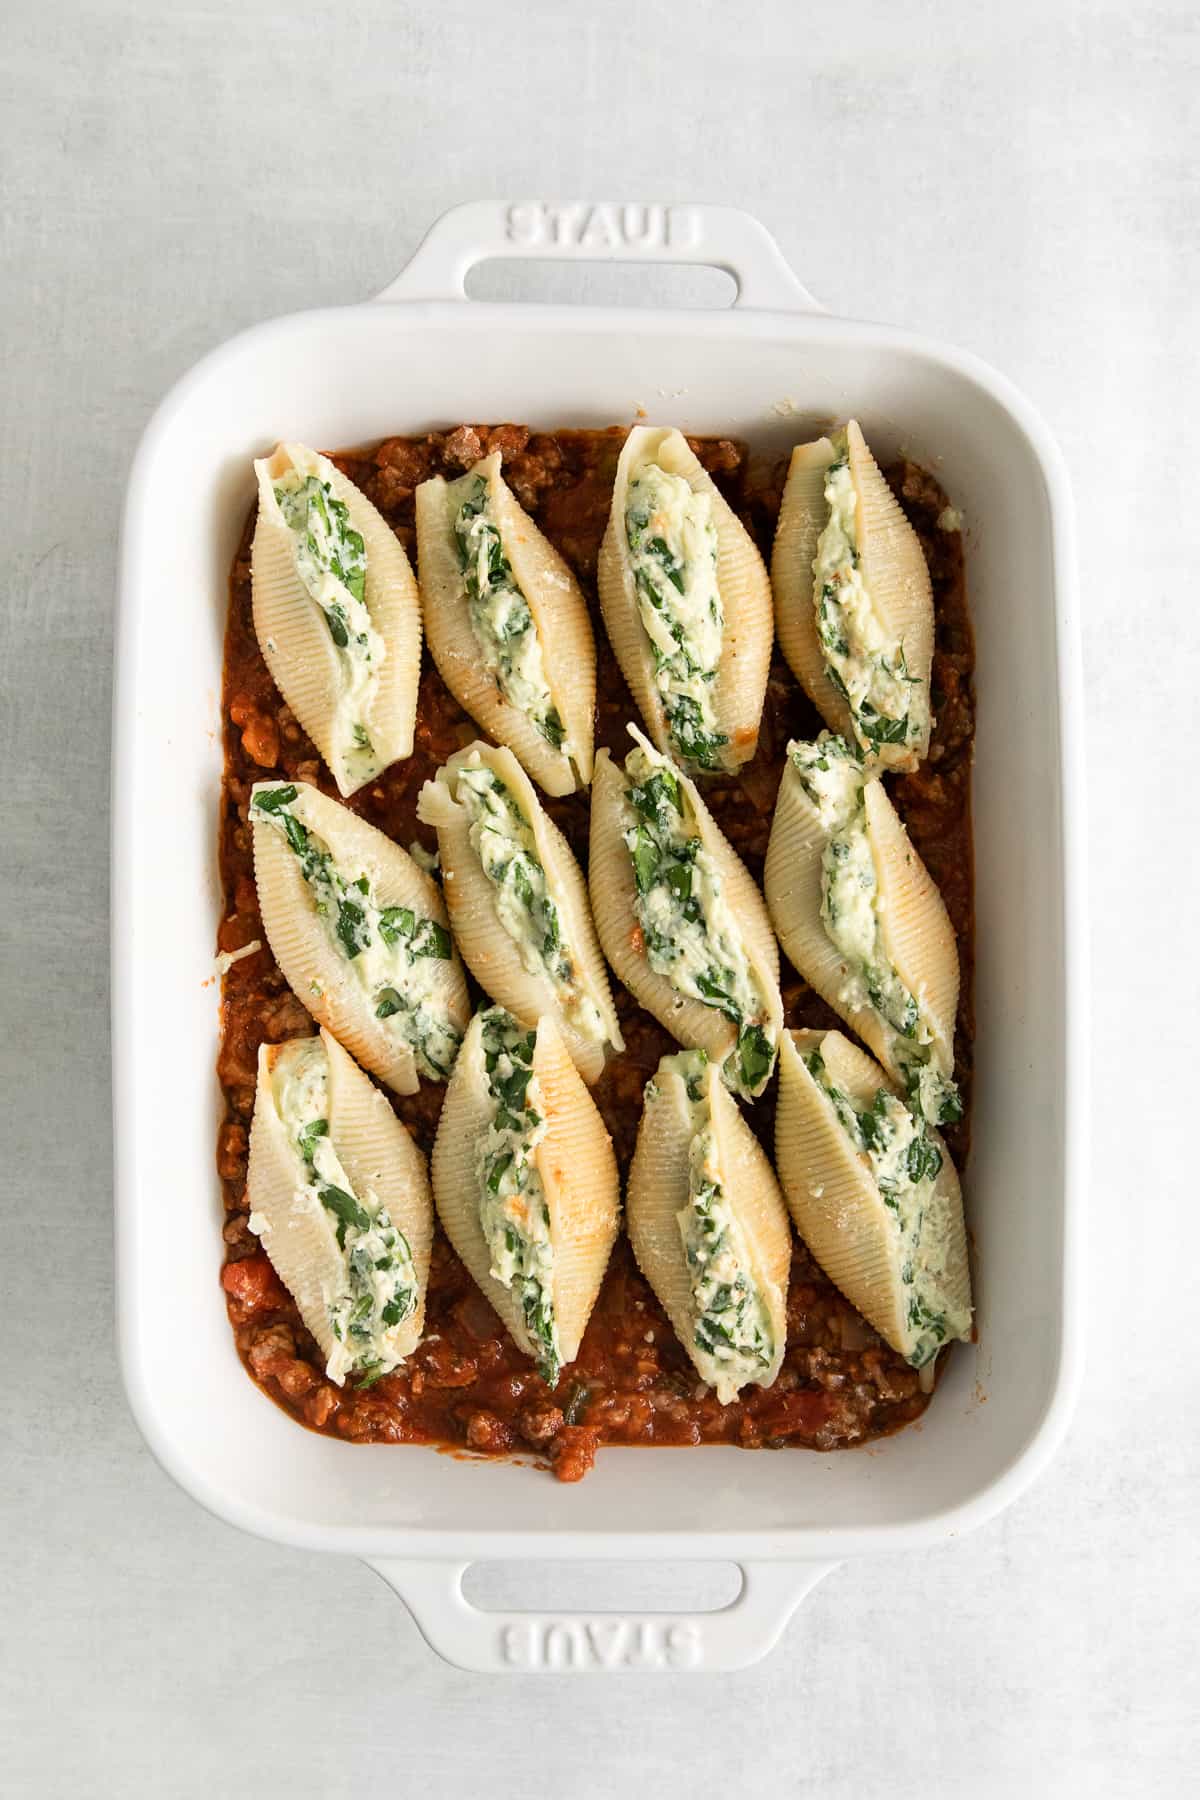 Stuffed shells with meat sauce in a casserole dish.